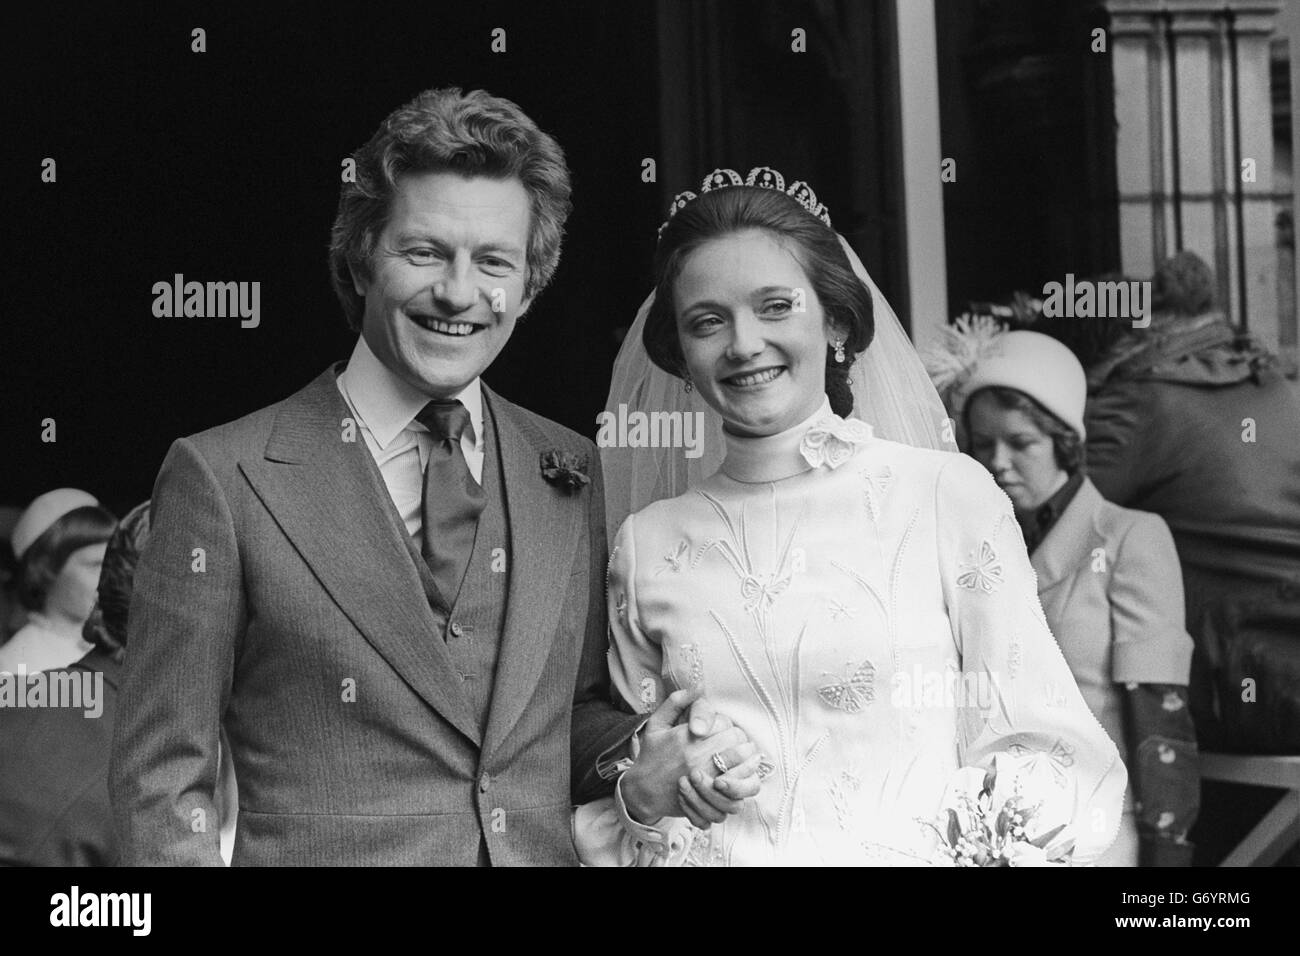 Royal Wedding - Earl of Lichfield and Lady Leonora Grosvenor - Chester Stock Photo